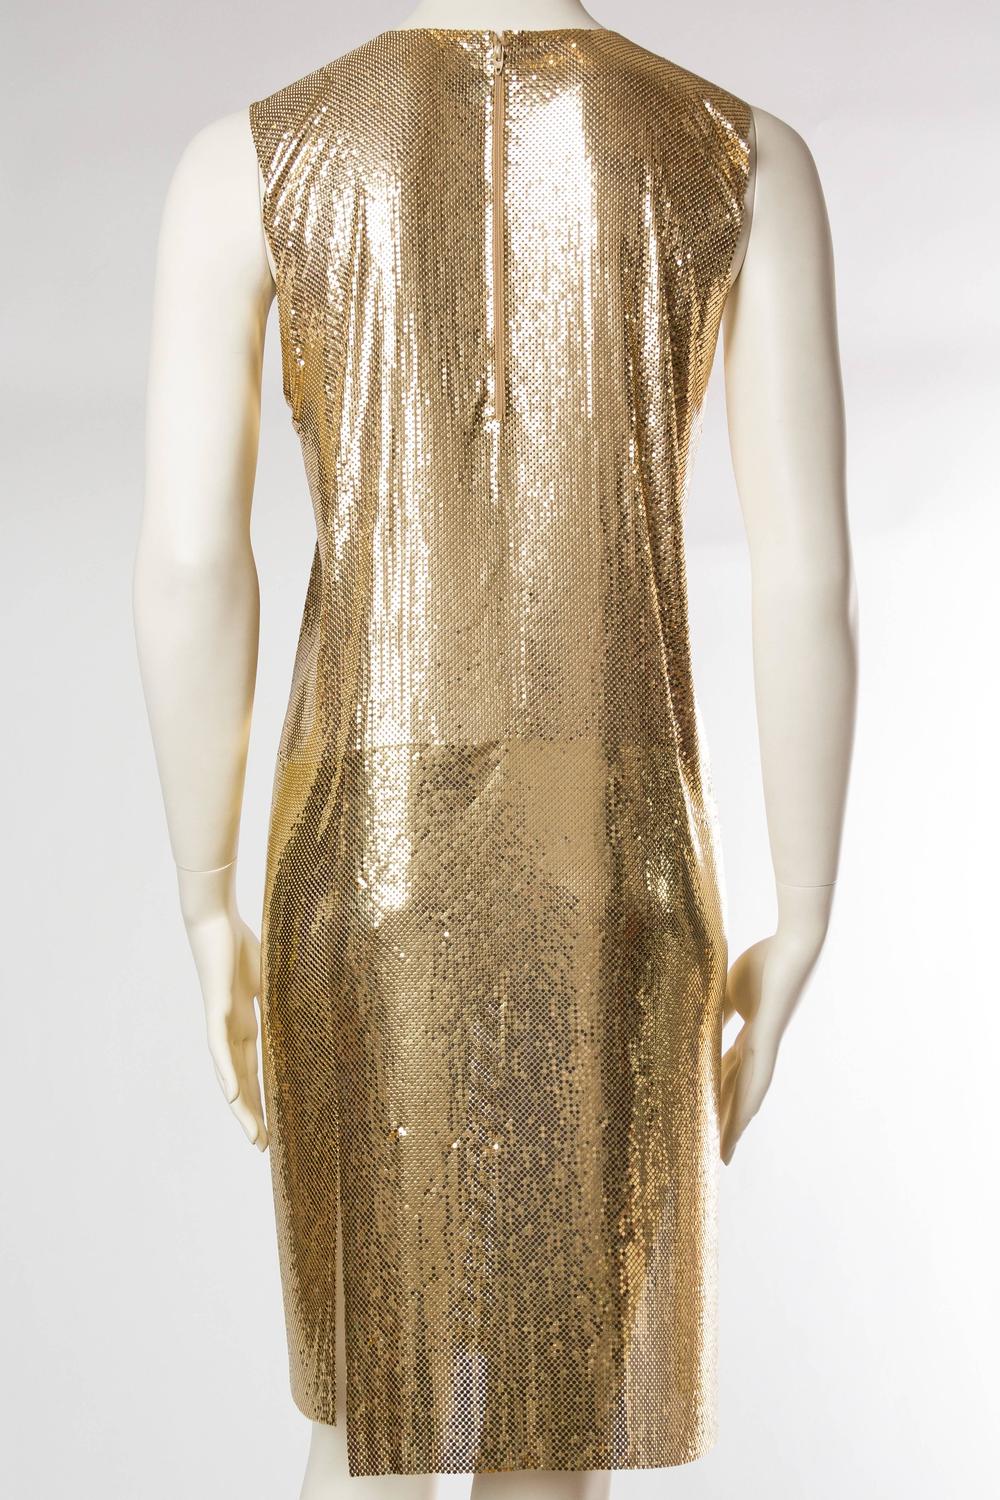 Rock and Roll in Solid Gold Slashed Metal Mesh Dress For Sale at 1stdibs